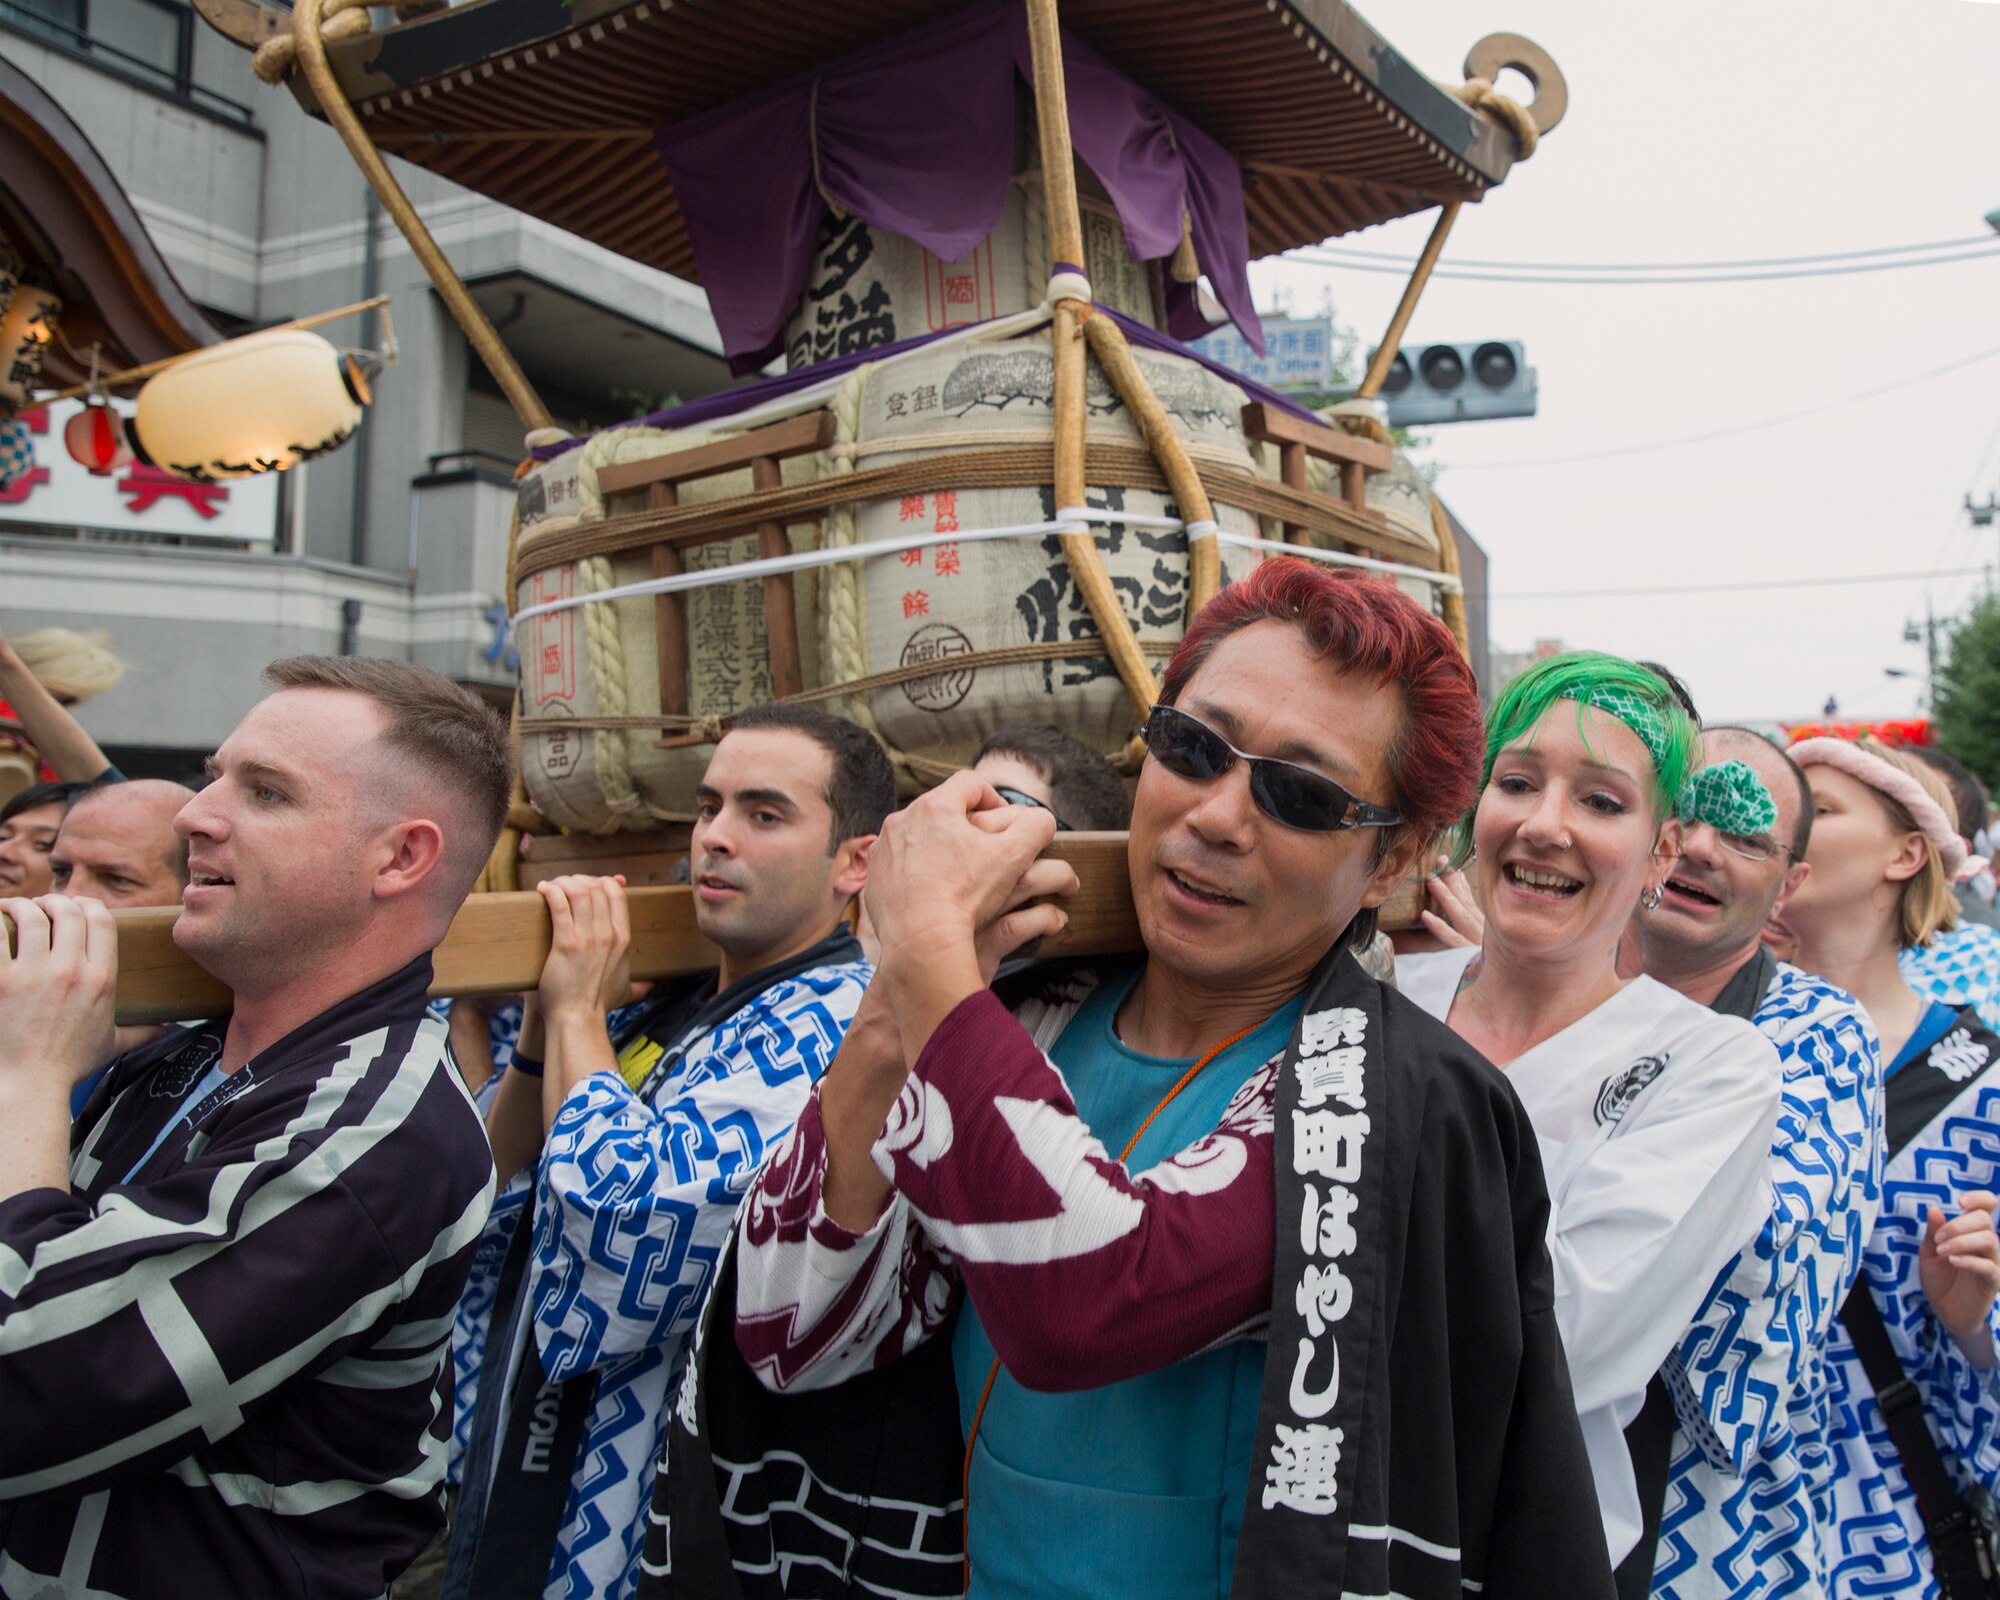 Airmen from Yokota Air Base help carry a mikoshi shrine with their Japanese friends during the Fussa Tanabata Festival in Fussa City, Japan, Aug. 8, 2014. The festival gives Yokota members an opportunity to meet and build friendships with the local community while experiencing Japanese culture. (U.S. Air Force photo by Osakabe Yasuo/Released)